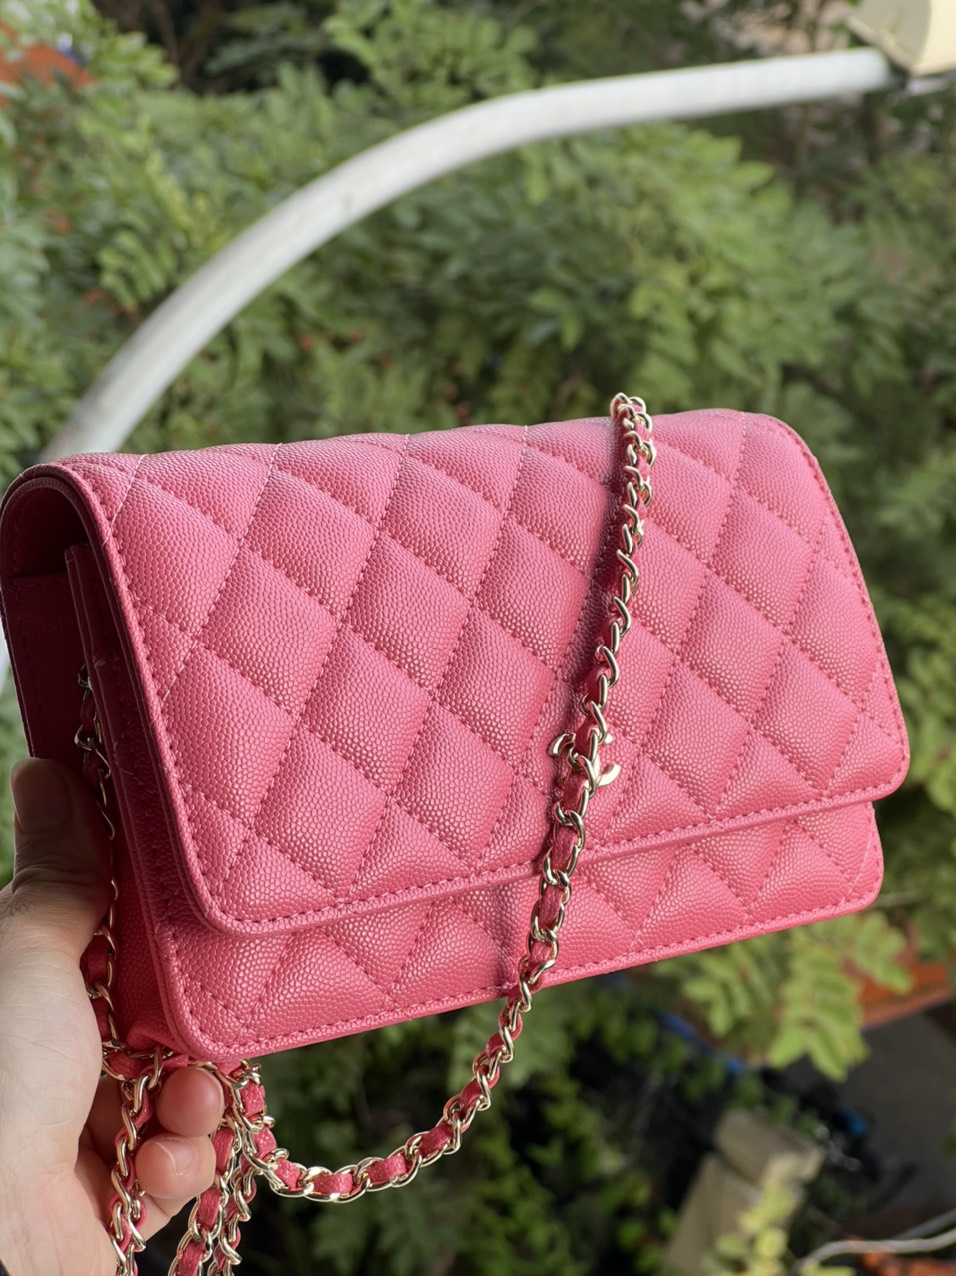 NIB 19S Chanel Iridescent Pink Caviar Classic Wallet on Chain WOC Bag   Boutique Patina